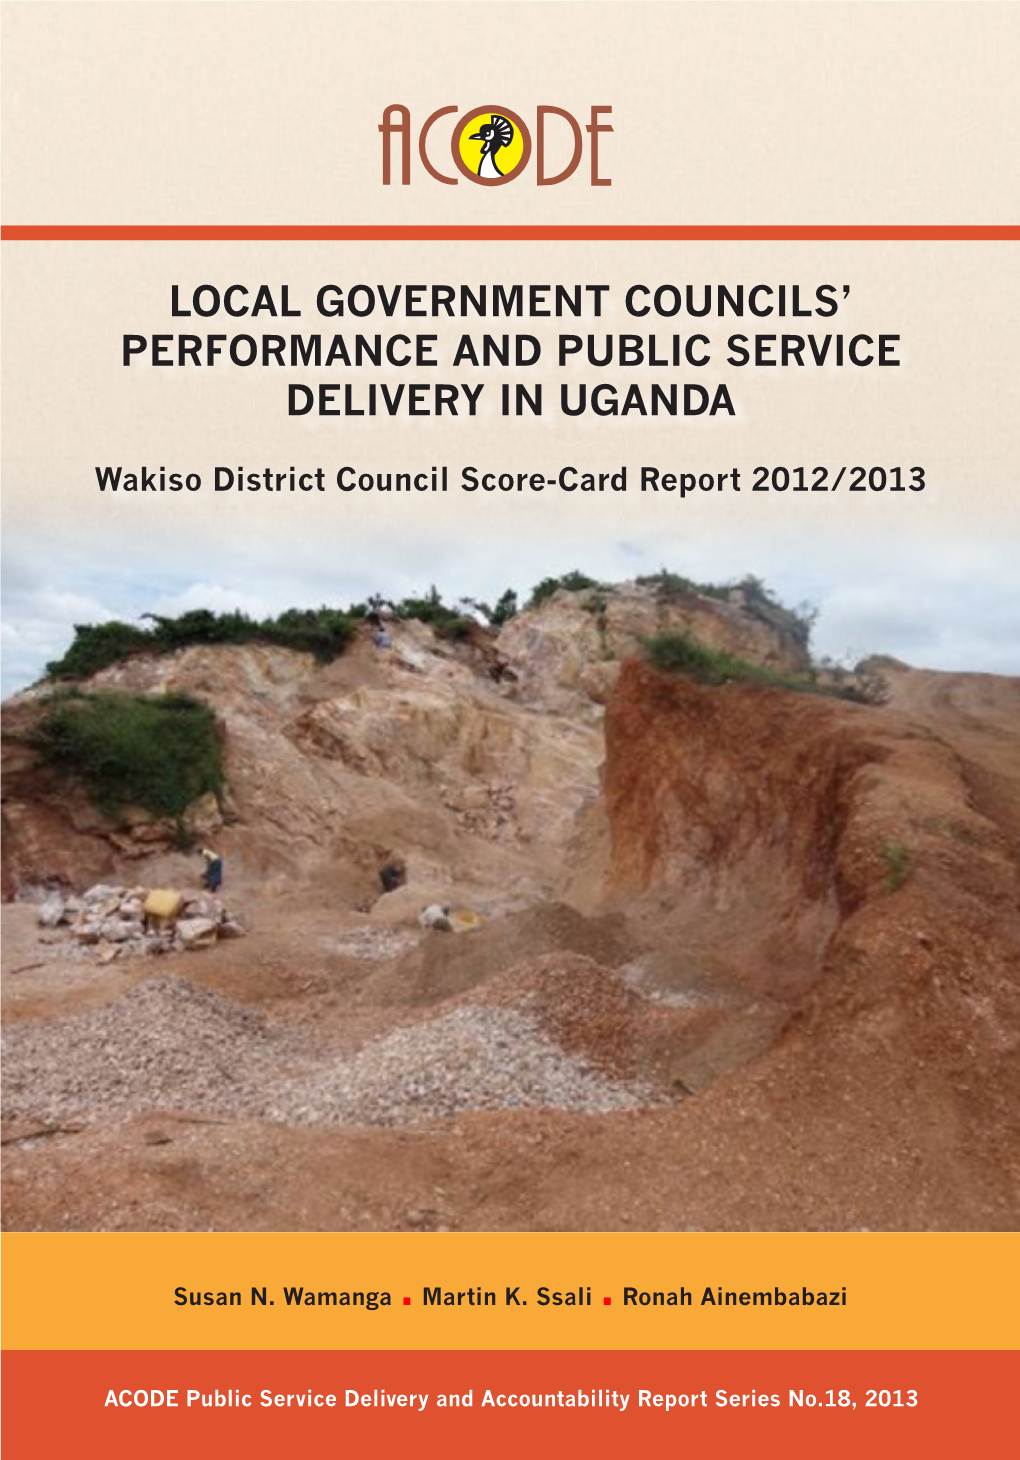 Local Government Councils' Performance and Public Service Delivery in Uganda